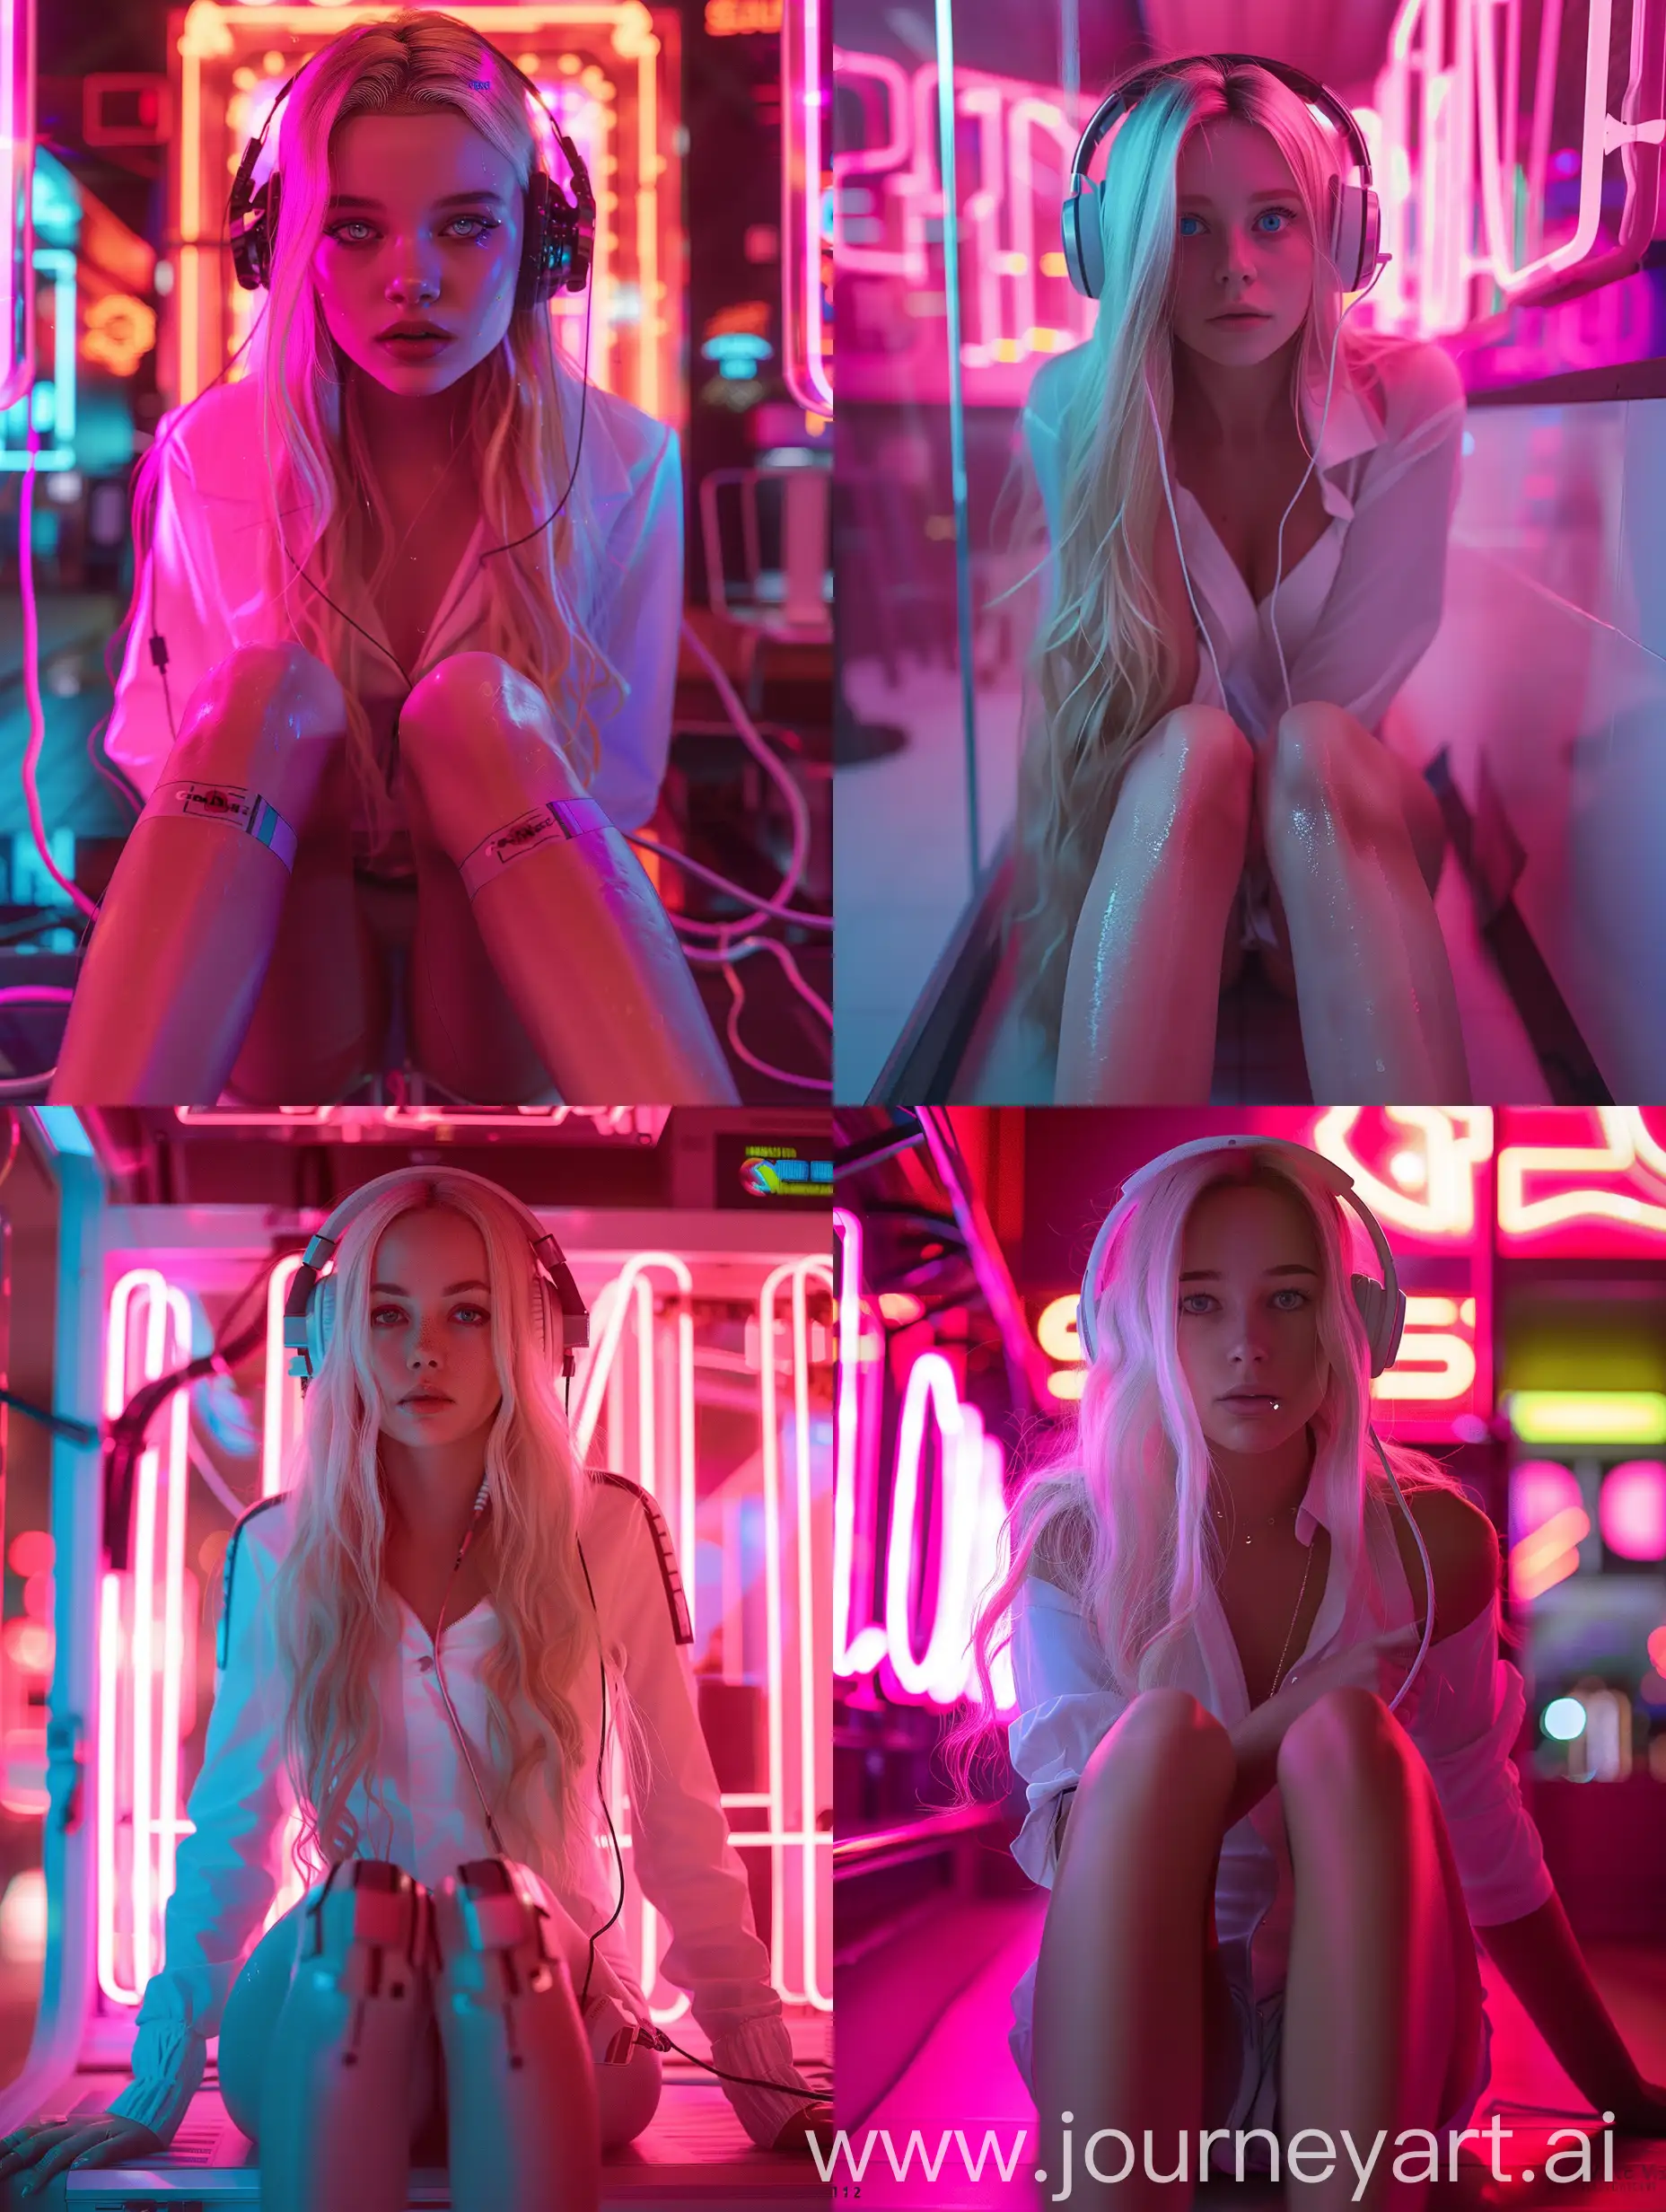 Kodak Vision 2383, Low Angle full body shot of a mystic woman named Lisa Lou, with blond long hair and long model lags, wearing high-tech headphones and a white shirt, The background unfocused pinkish Neon Signs lights, with her "beautiful big blue eyes" she looks directly into the camera, detailed natural skin, retrofuturism, future tech, dramatic cinematic lighting, RAW photo, high detailed Natural skin, film grain, cyberpunk neon look, camera f1.6 lens, rich colors,